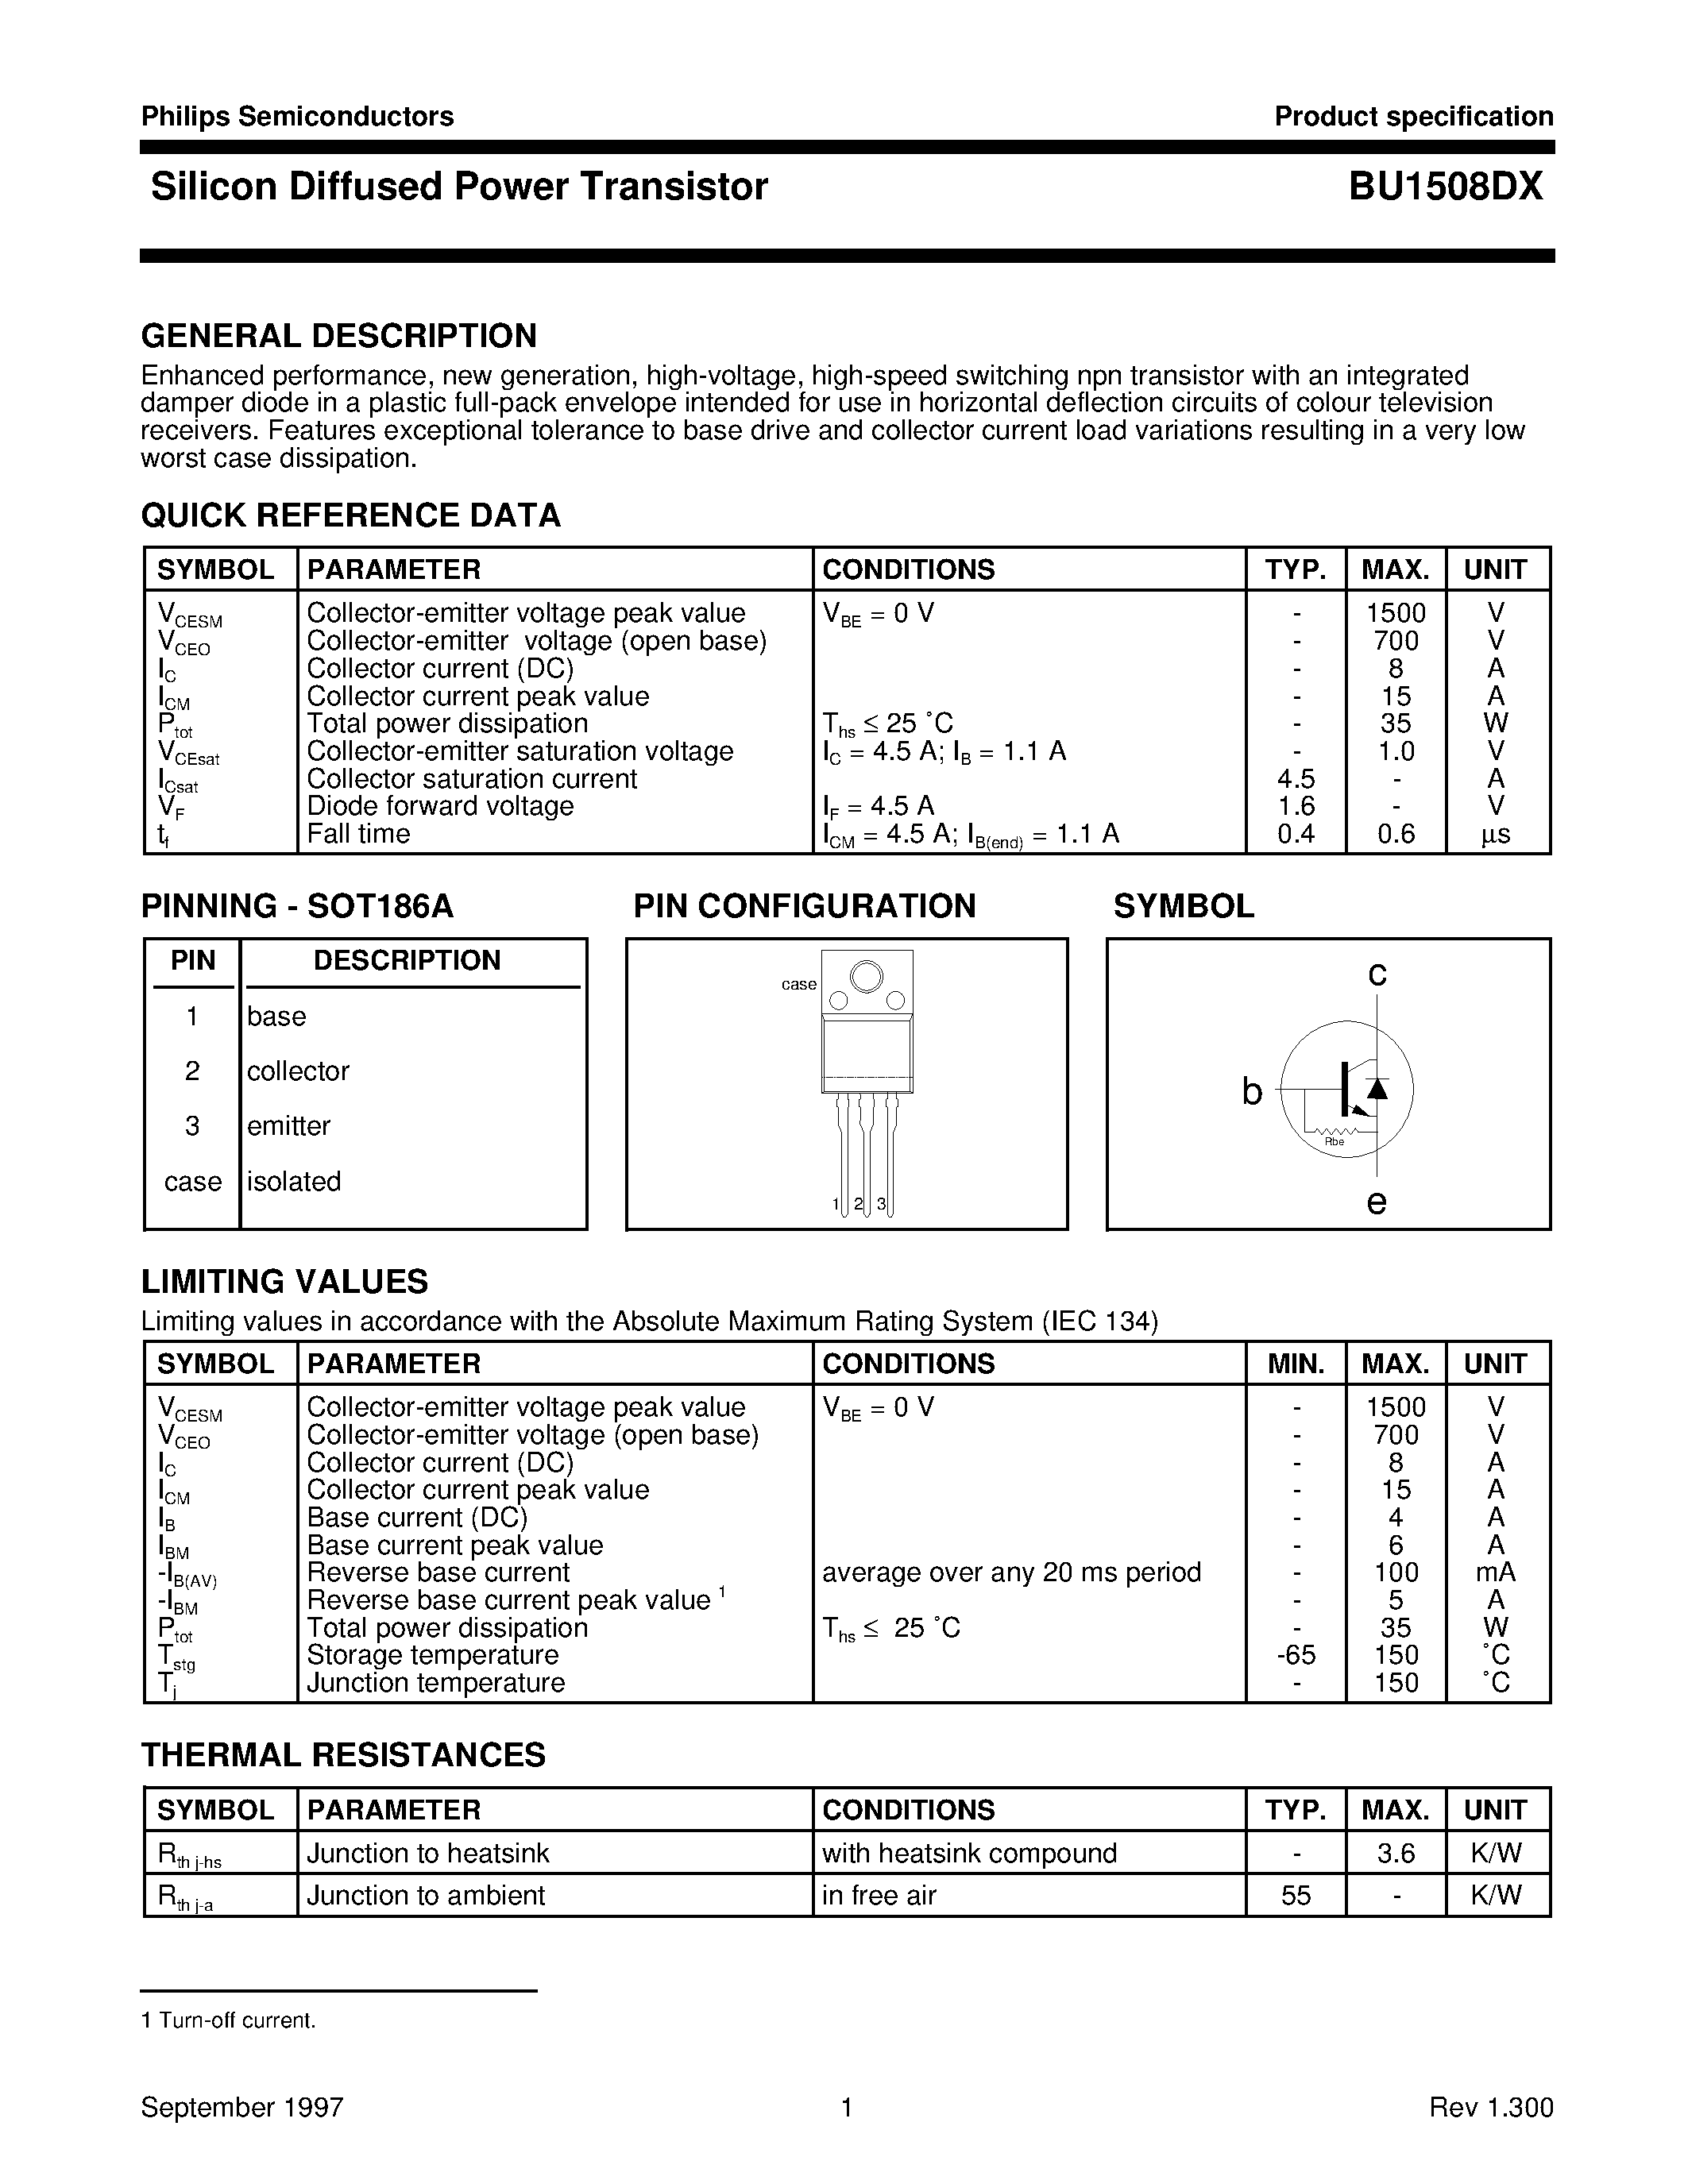 Datasheet BU1508DX - Silicon Diffused Power Transistor page 1